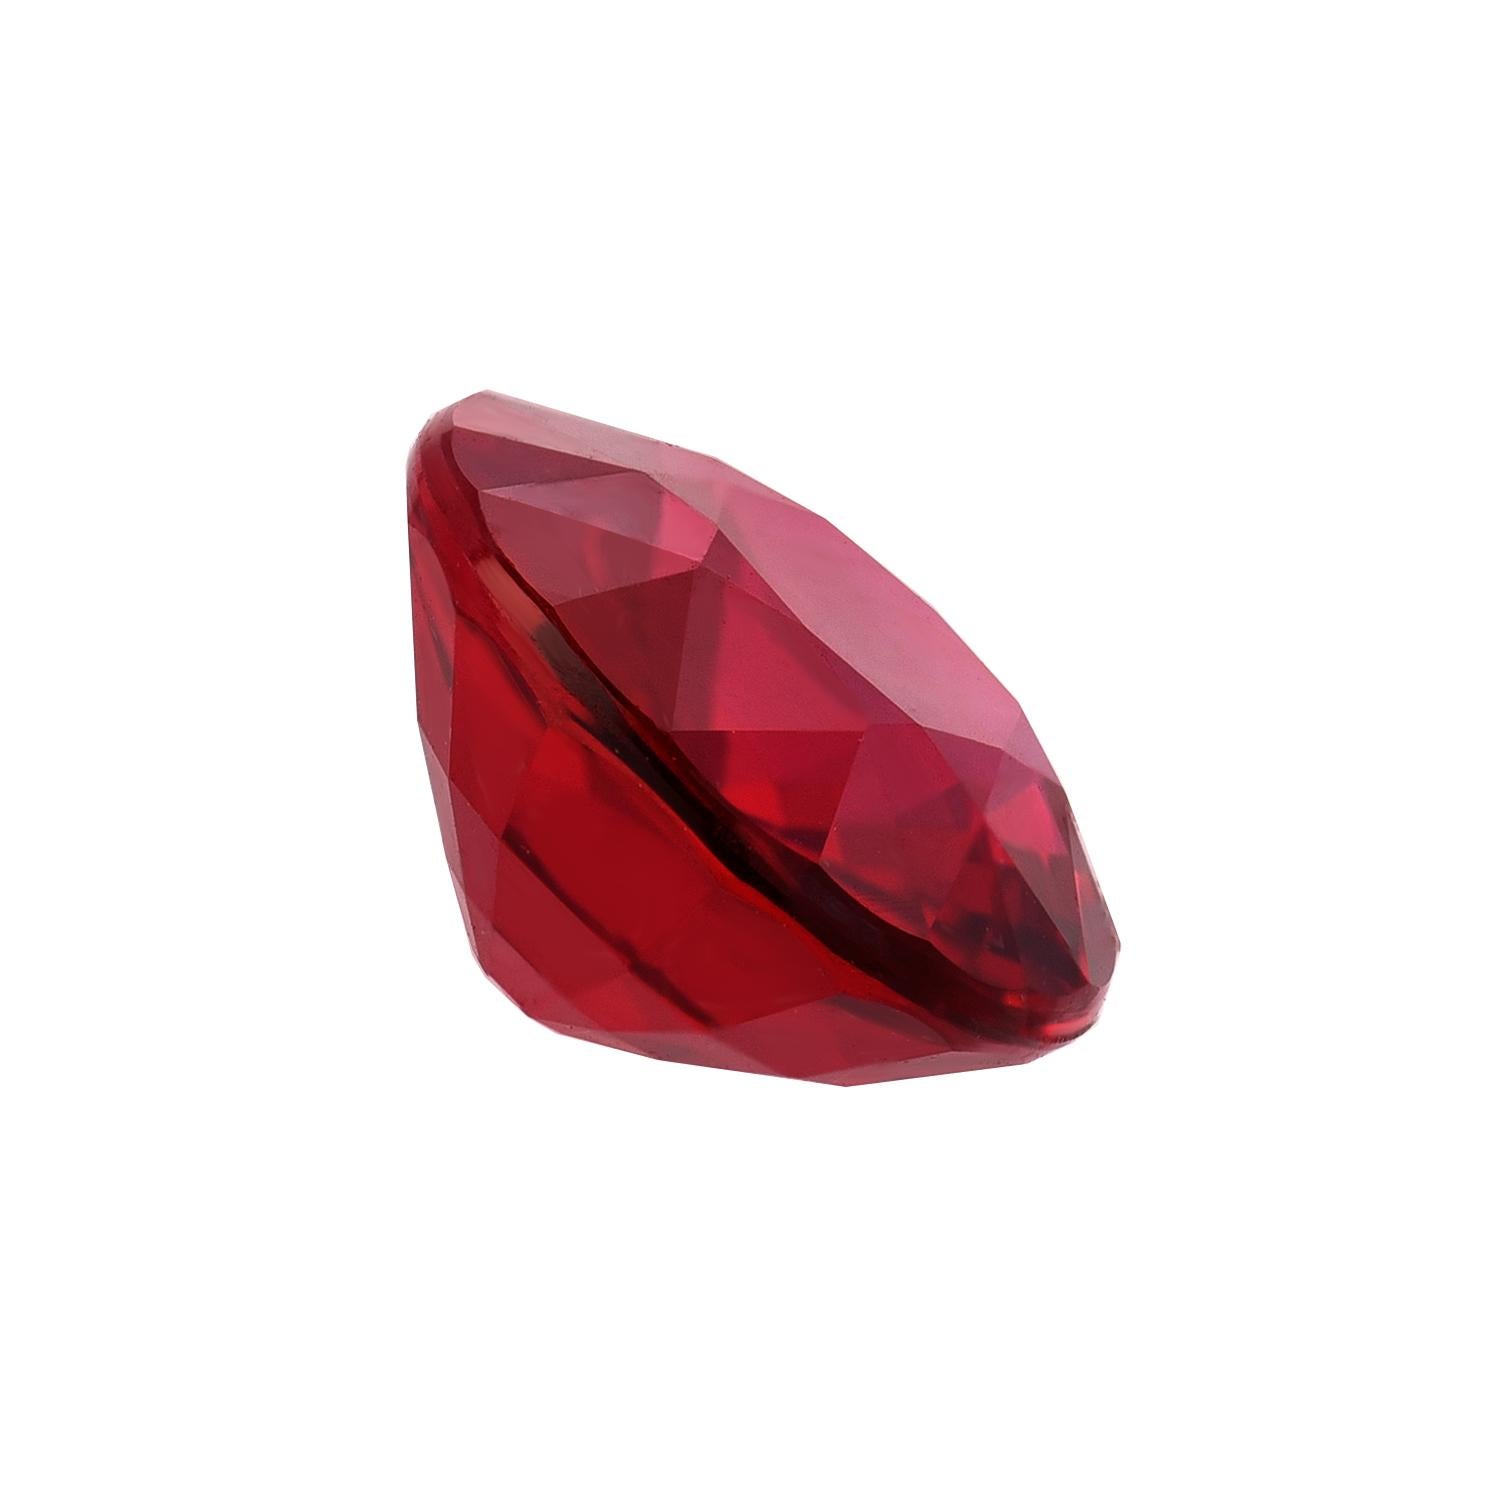 Exceedingly fine 2.09 carat natural, no heat Ruby oval gem, offered loose to a sophisticated gemstone collector.
The AGL gem certificate is attached to the image selection for your reference.
Returns are accepted and paid by us within 7 days of